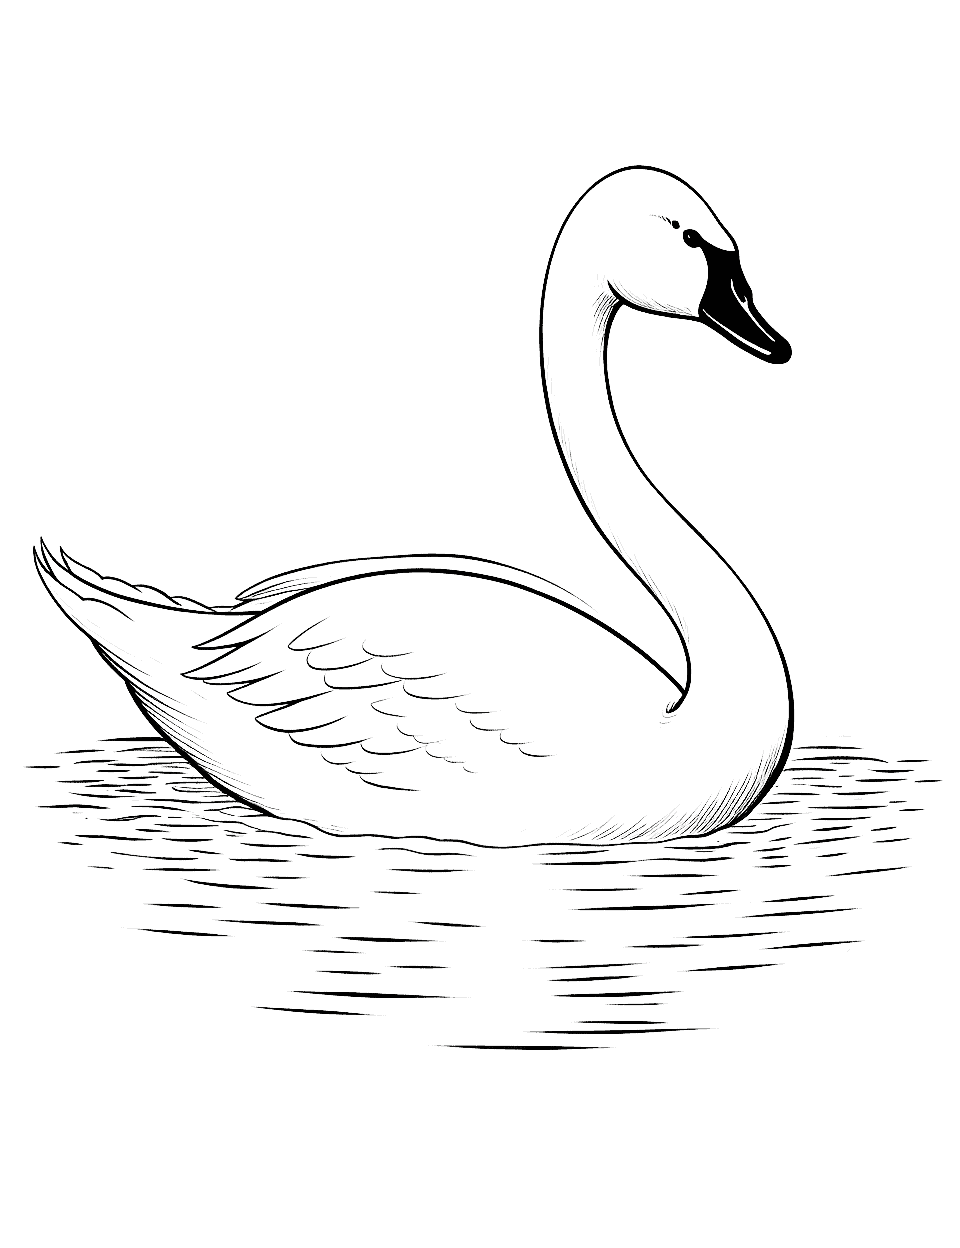 Elegant Swan Animal Coloring Page - A graceful swan gliding across a calm and serene lake.